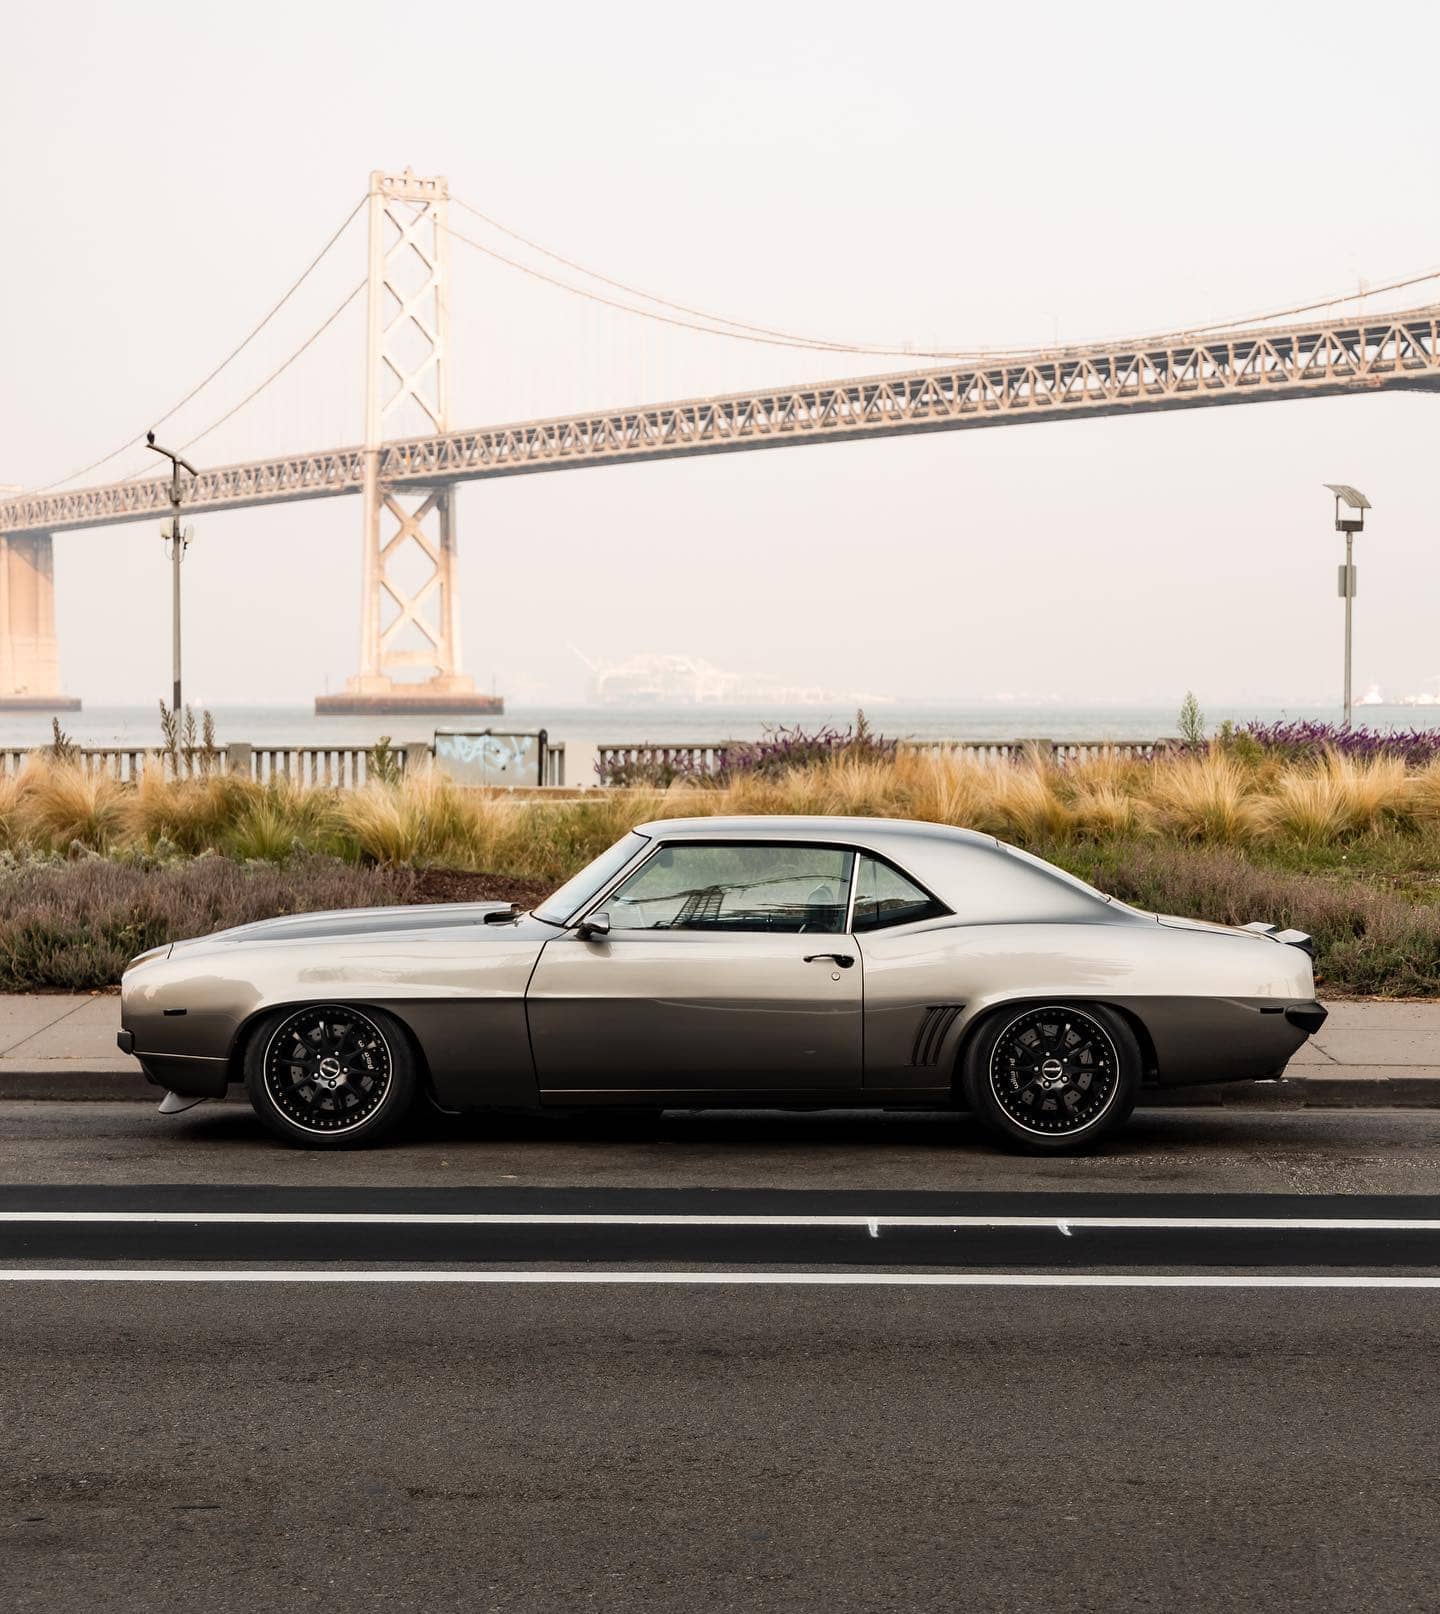 Lowered 1969 Chevy Camaro Z28 Pro Touring build on Ridetech coilovers and 4 link suspension in the rear. The Forgeline wheels, sporting 245/40/18 front and 275/40/18 rear tires, ensure that all the power is put to good use.